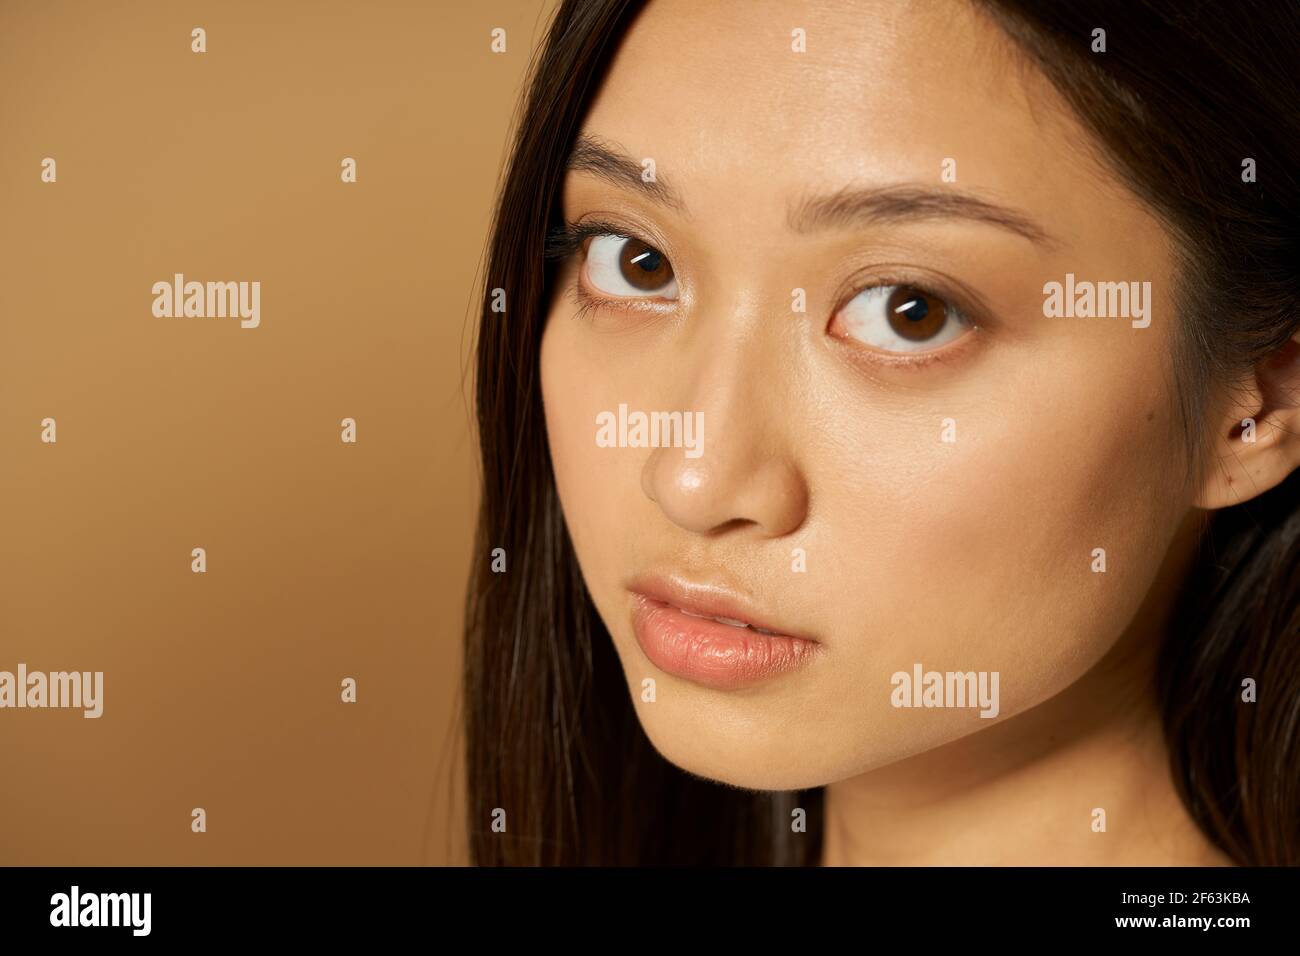 Face Closeup Of Beautiful Mixed Race Young Woman With Glowing Skin Looking At Camera While 5602